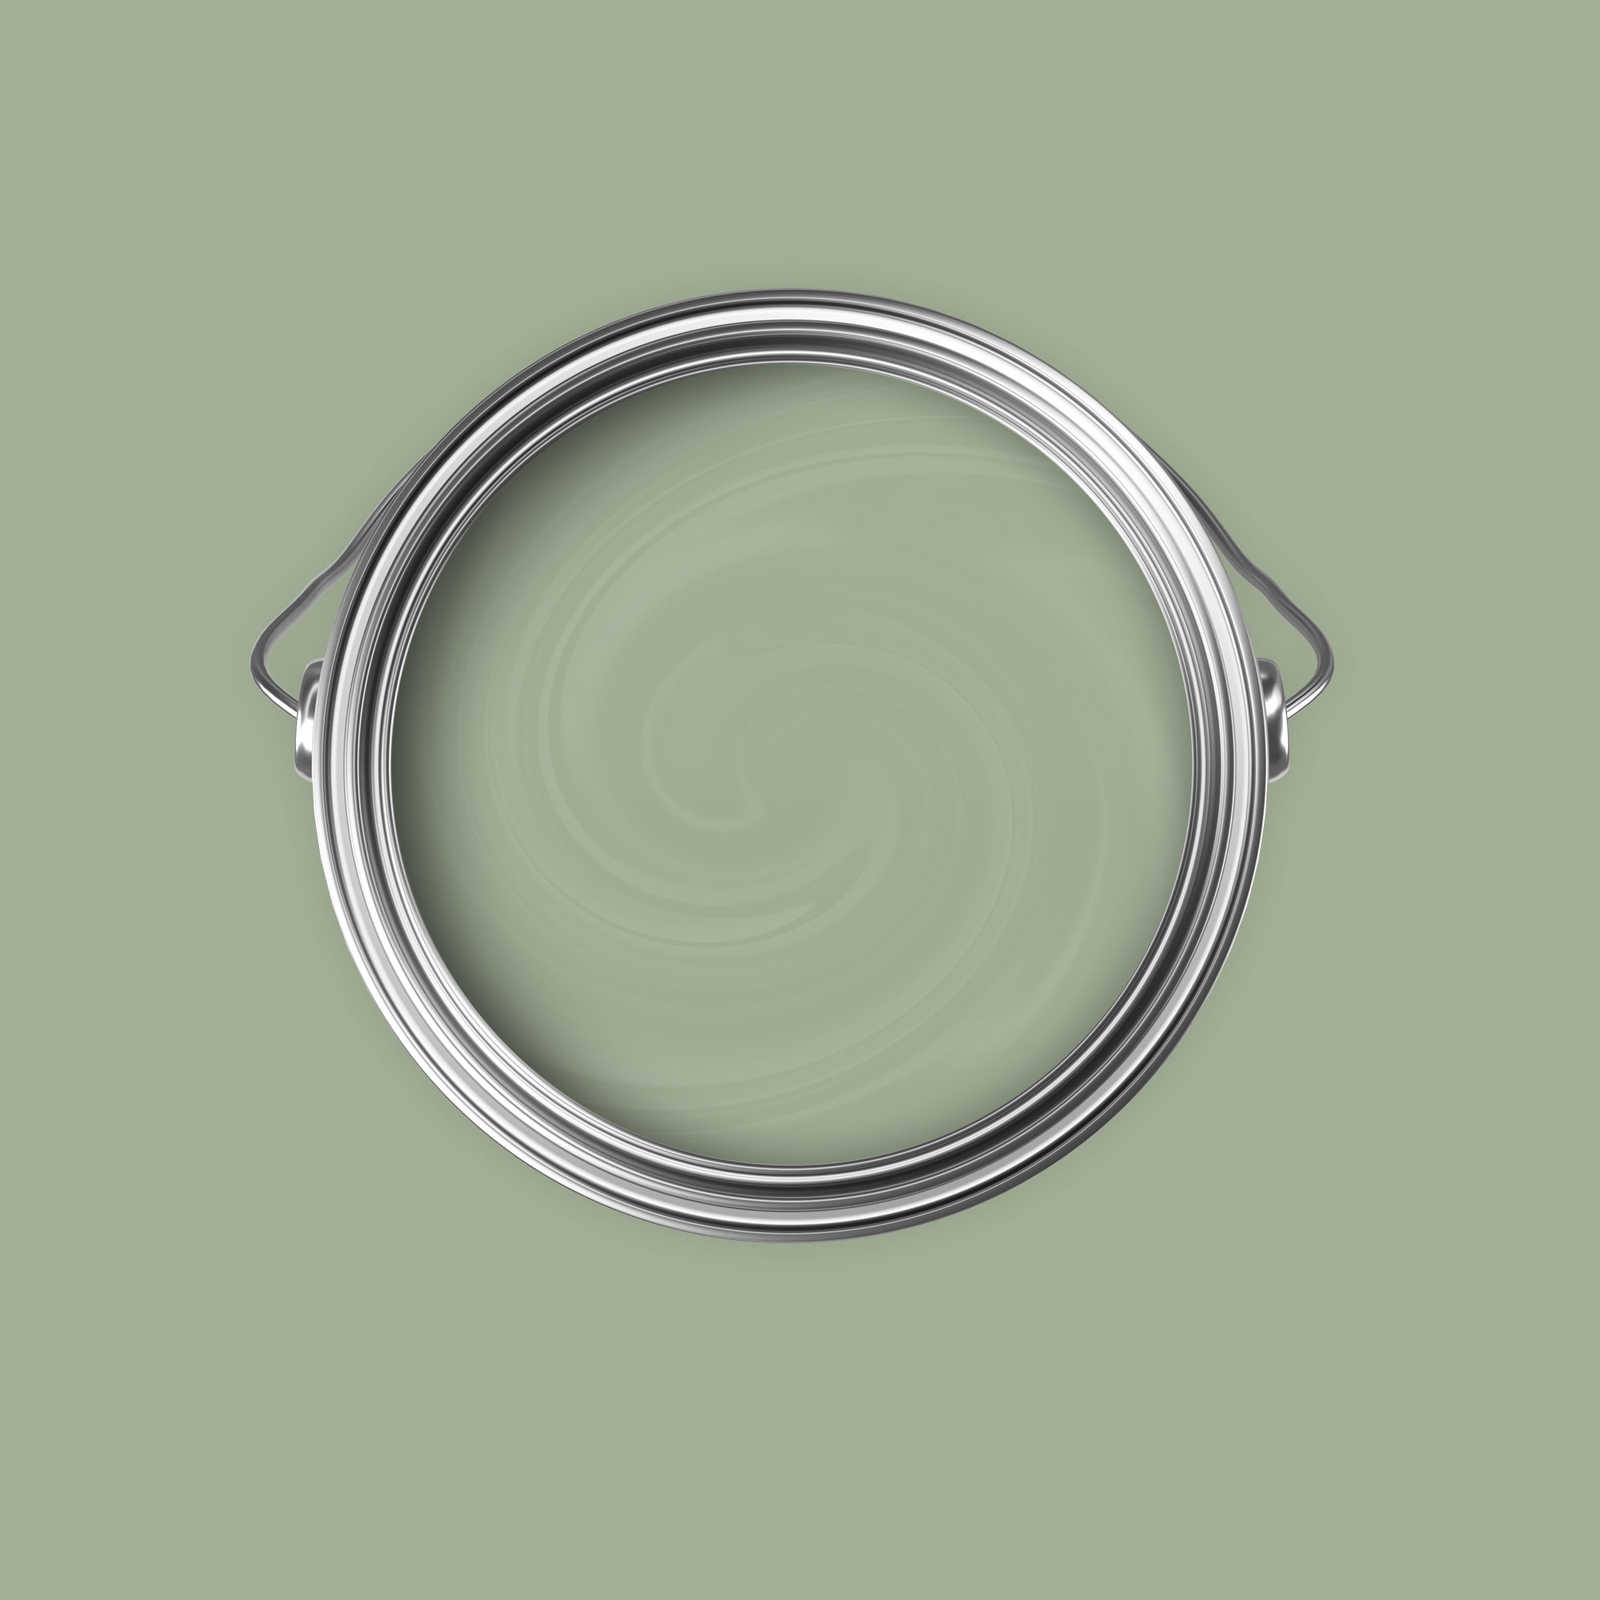             Premium Wall Paint Earthy Olive Green »Gorgeous Green« NW502 – 5 litre
        